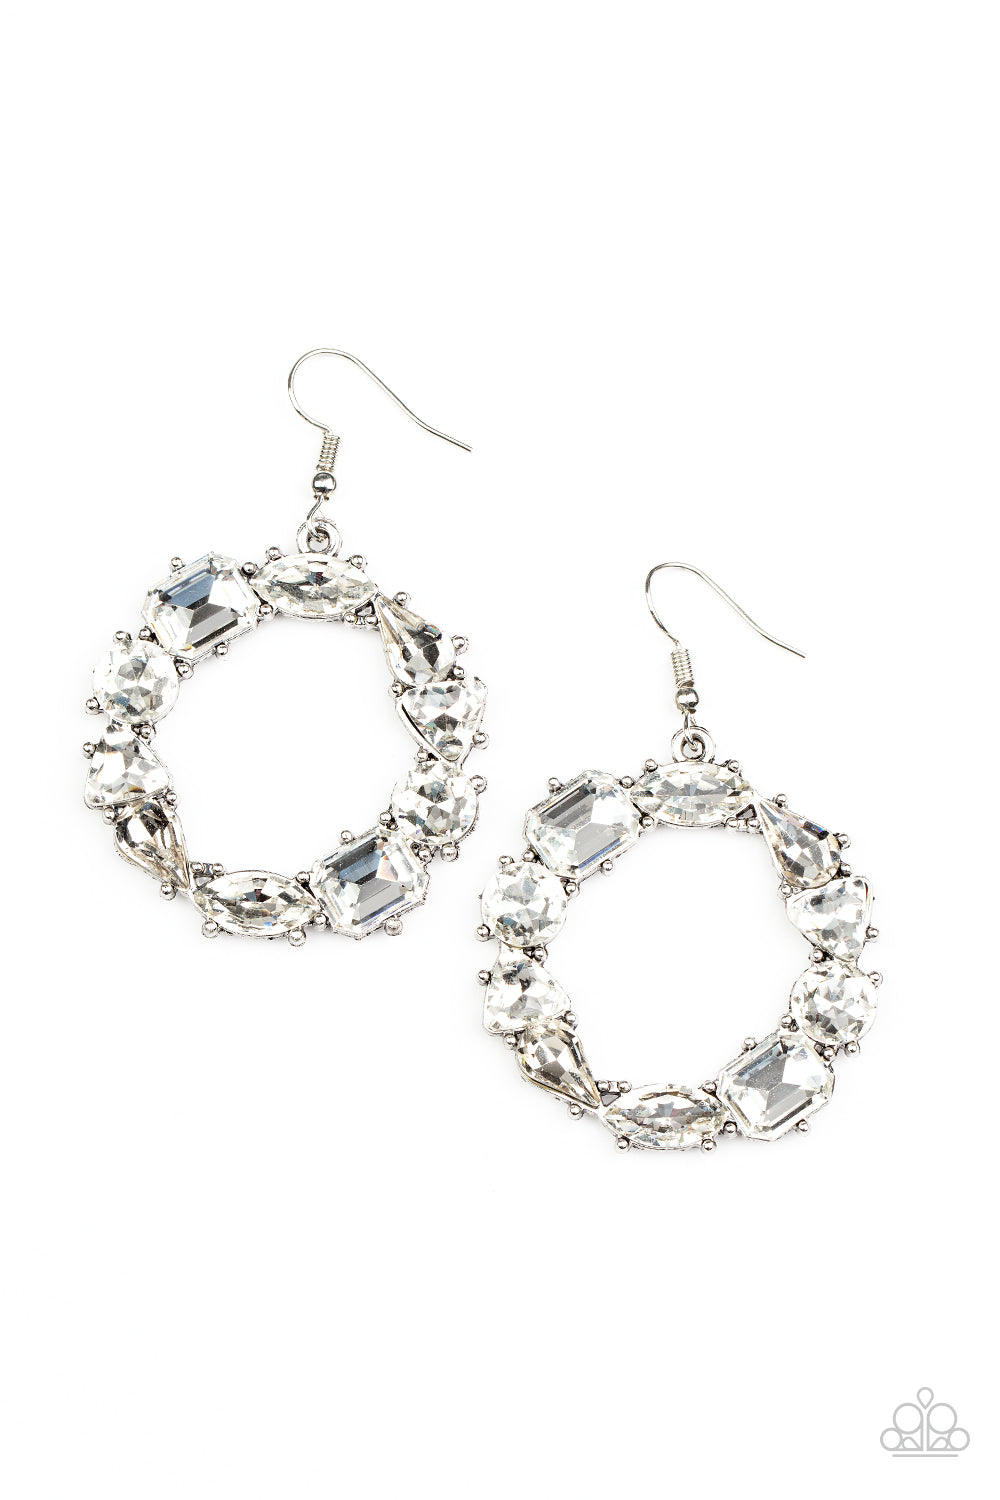 Paparazzi Accessories - GLOWING in Circles - White Earring